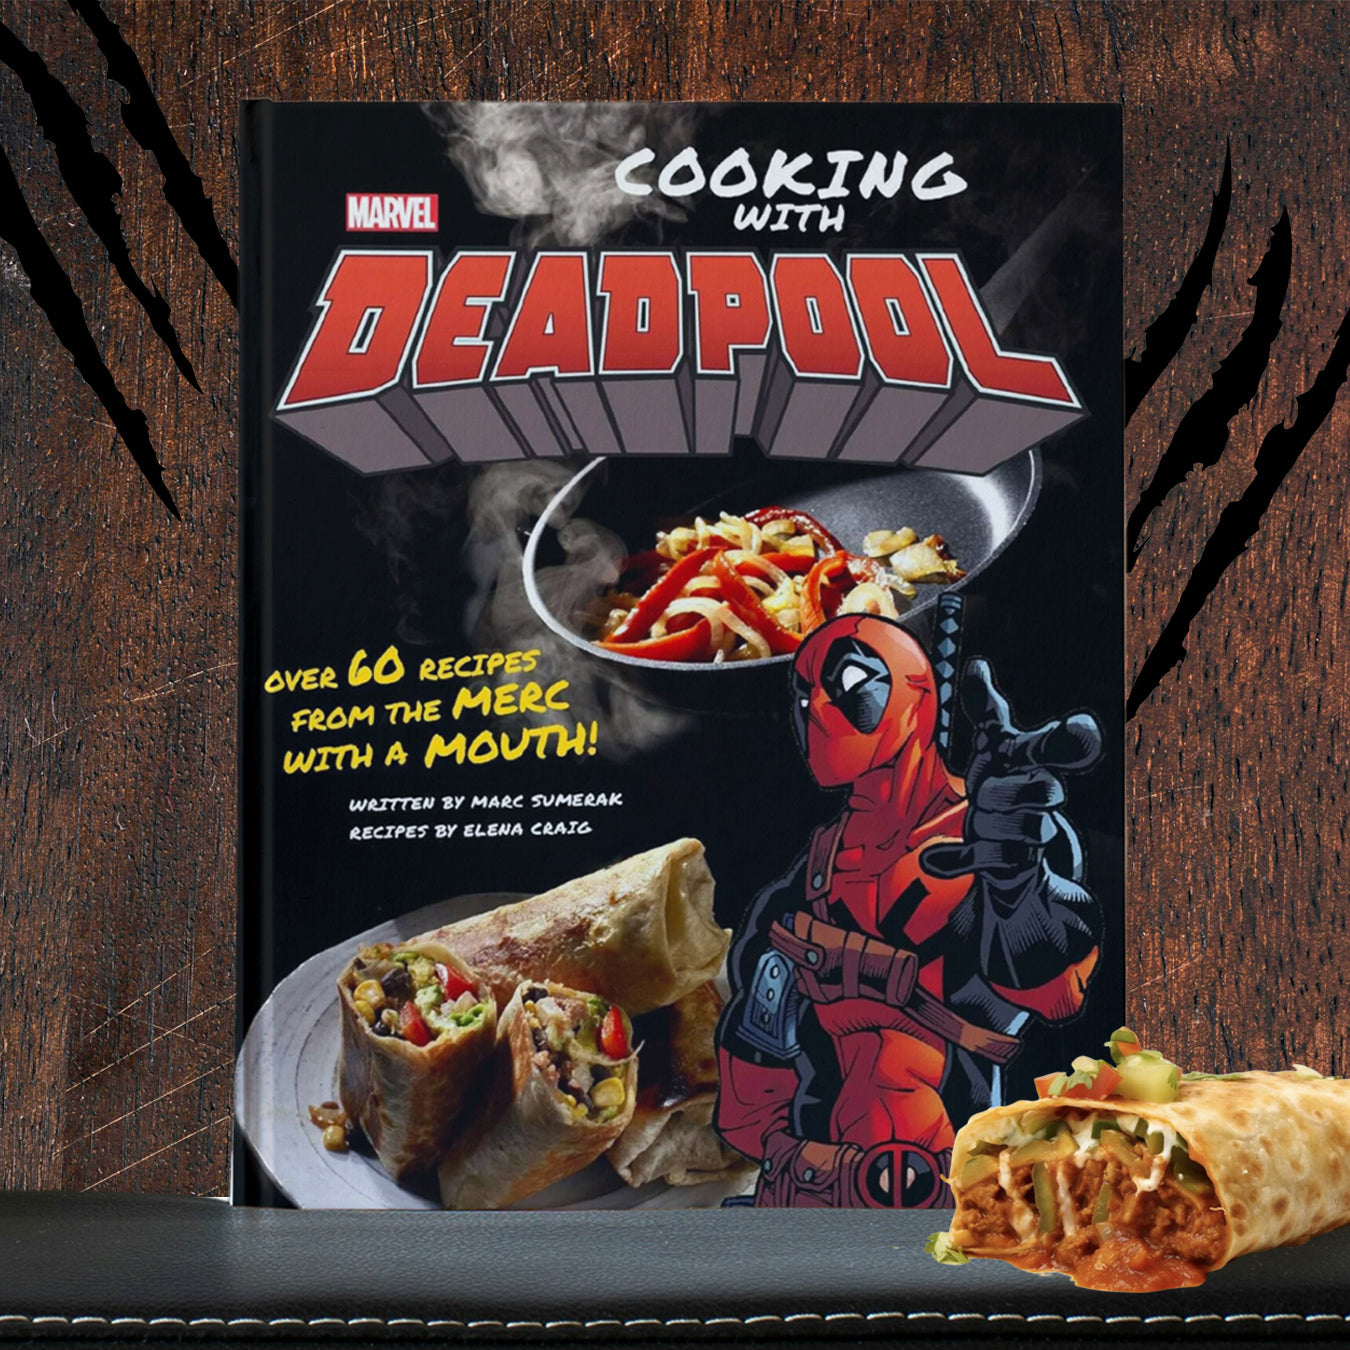 A book with "Cooking with Deadpool" as the title, "over 60 recipes from the merc with a mouth" and " written by Marc Sumerak, recipes by Elena Craig” on the front with various dishes with food. Deadpool drawn like his comic book format is pointing to camera. The book is on a leather shelf next to a chimichanga and behind the book is a wooden wall with Wolverine claw marks.